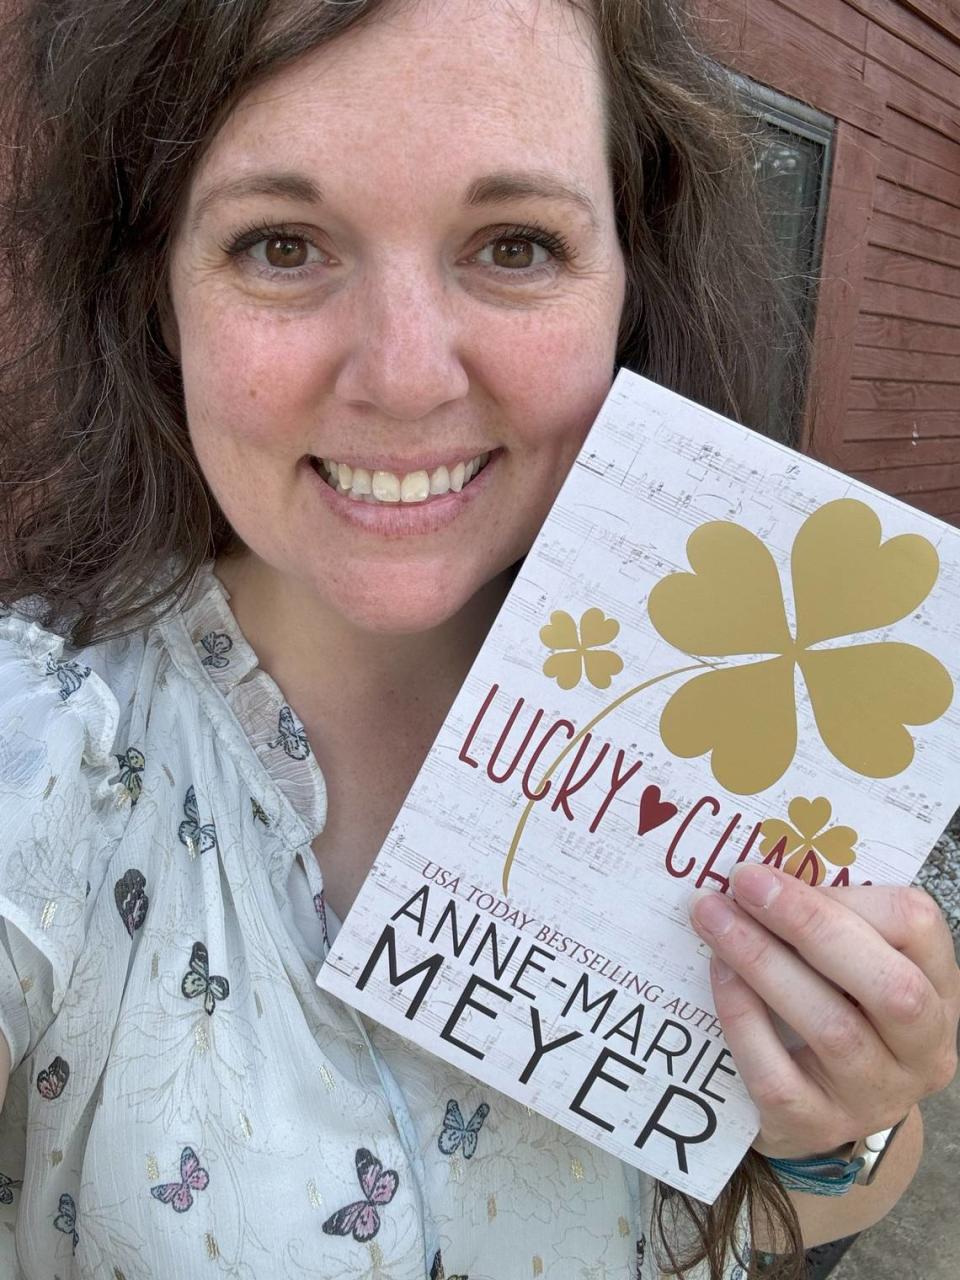 Author Anne-Marie Meyer with her book “Lucky Charm,” which was inspired by Travis Kelce and Taylor Swift.